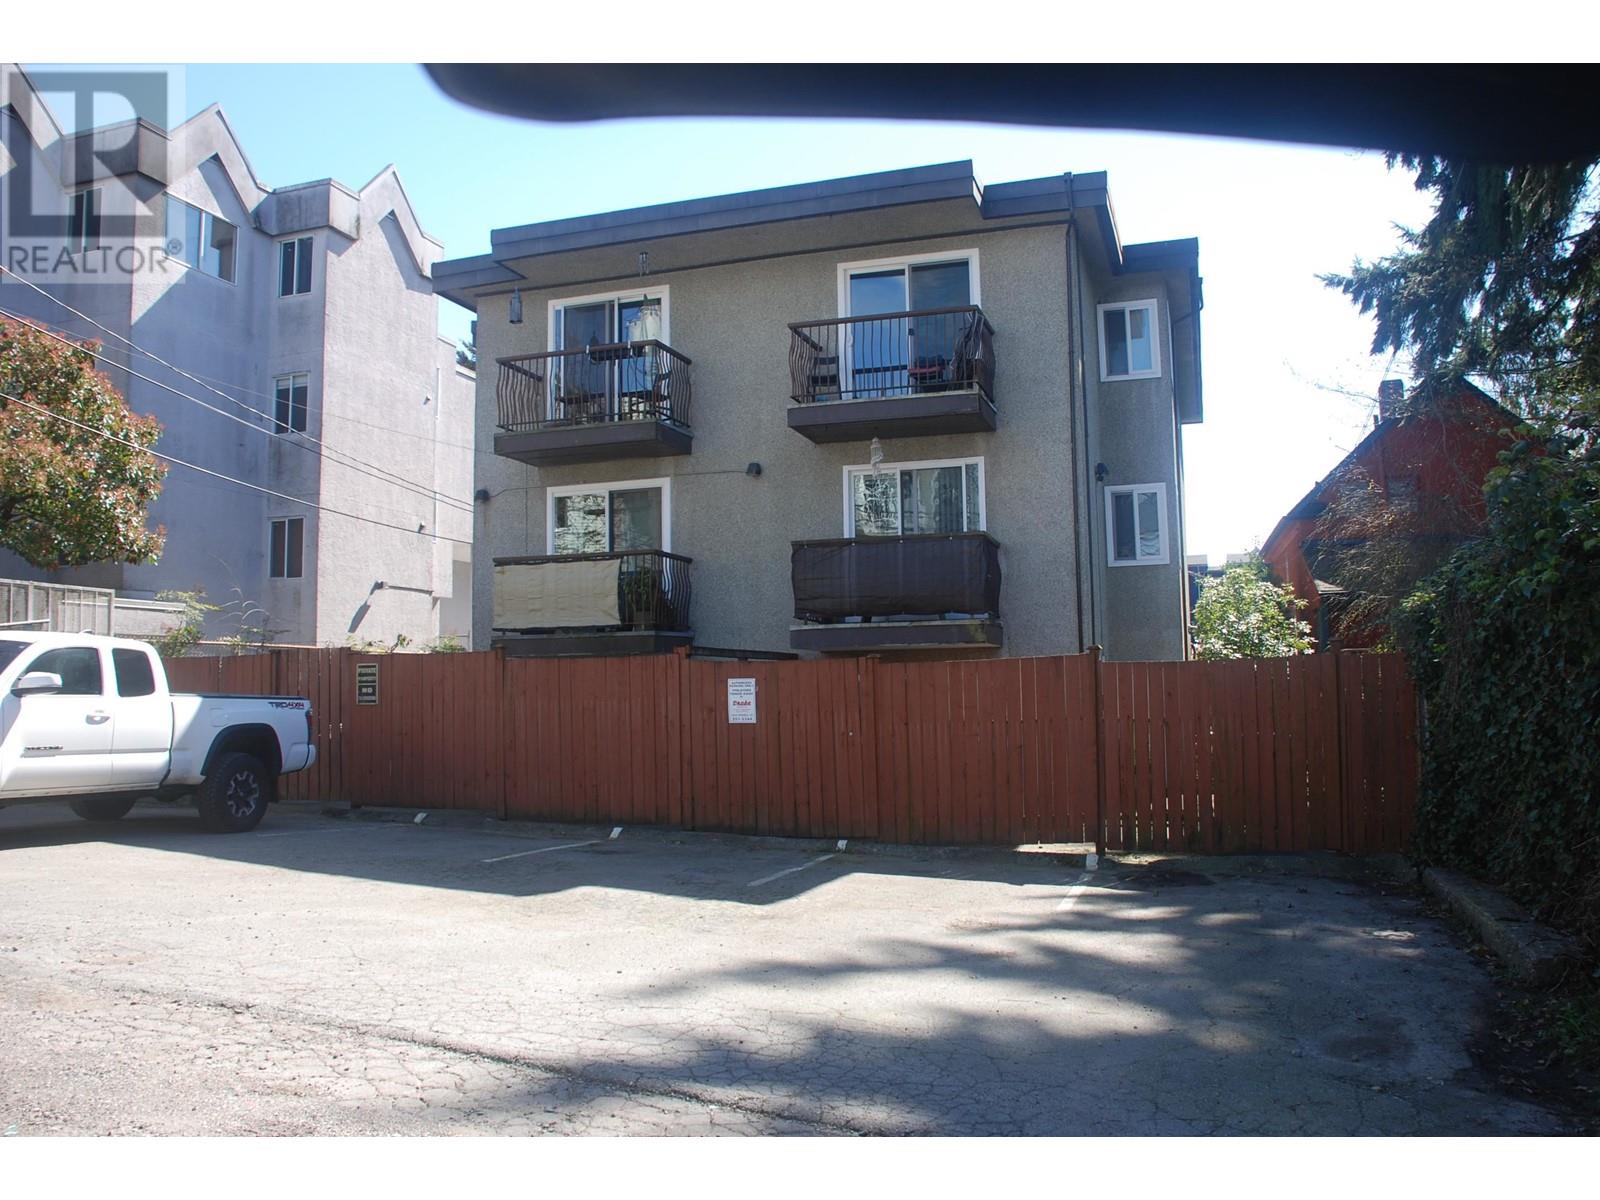 Listing Picture 2 of 5 : 1555 E 5TH AVENUE, Vancouver / 溫哥華 - 魯藝地產 Yvonne Lu Group - MLS Medallion Club Member